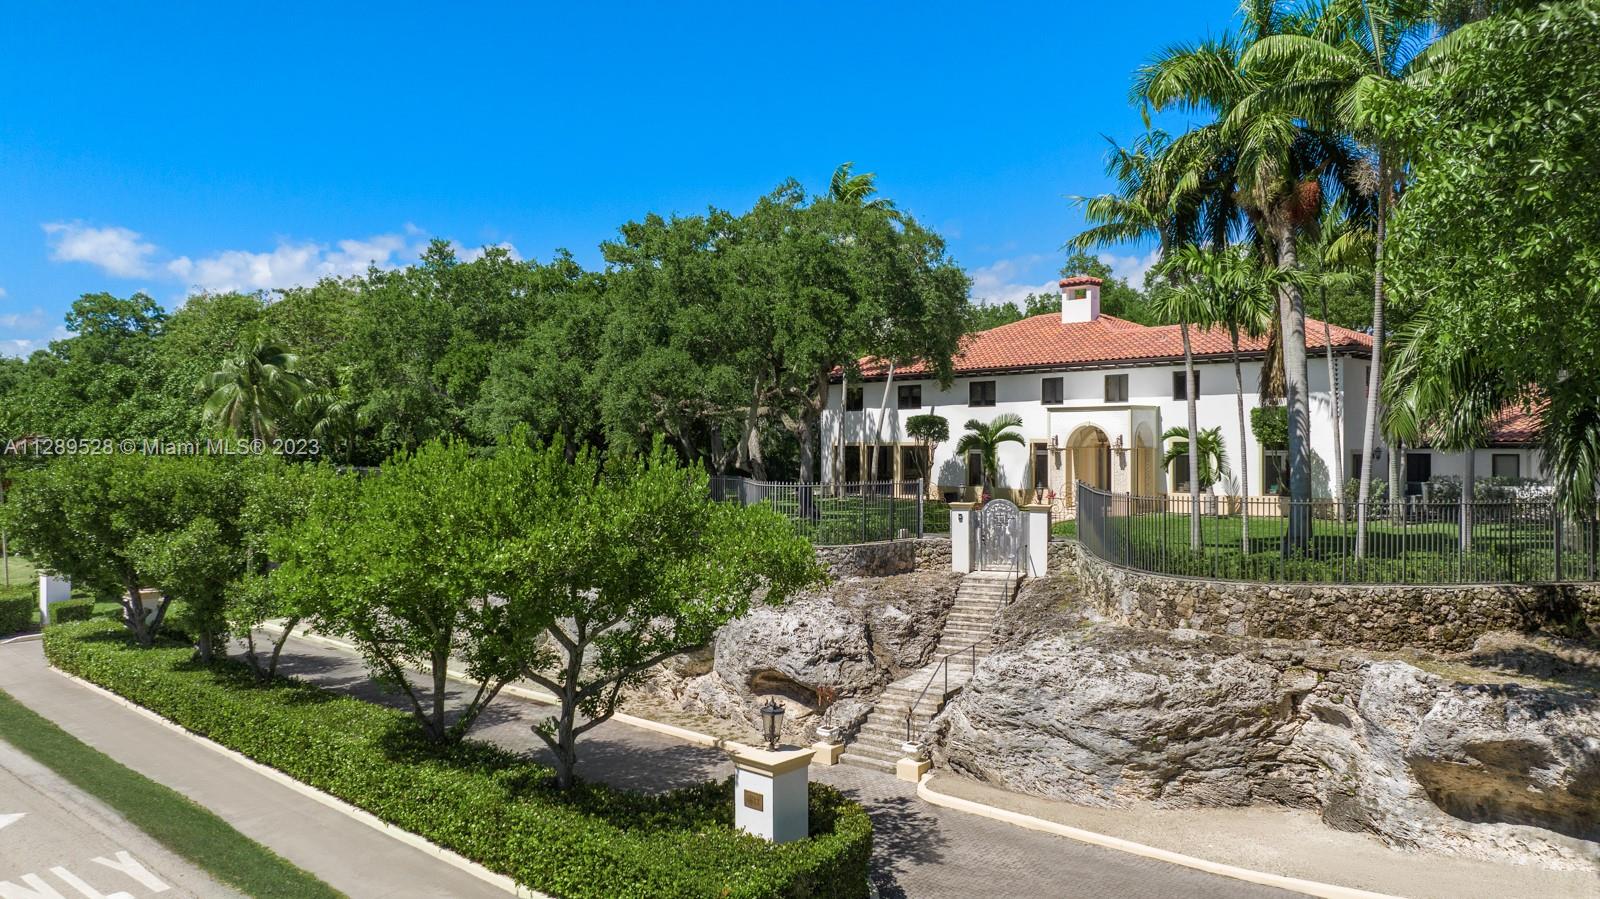 Landmark estate with a total structure area of 9,534 sq ft on a 40,000+ sq ft lot nestled in the heart of Coconut Grove. Indulge yourself in the magic of this Mediterranean revival villa, renovated in 2015 with an elevator, as well as smart home technologies. Built atop Coconut Grove’s famous silver bluff. Views over manicured grounds and mature oak trees through large windows that give the modern finishes and refined interiors. Entering the home, the foyer & formal living room feature details of marble & stone, high ceilings, an updated open kitchen, and a sprawling formal dining room with floor to ceiling glass throughout. Luxury and modernity are exemplified within the 7 oversized bedrooms w/ en-suite baths & primary suite. Adjacent  garage leads to staff quarters and laundry room.